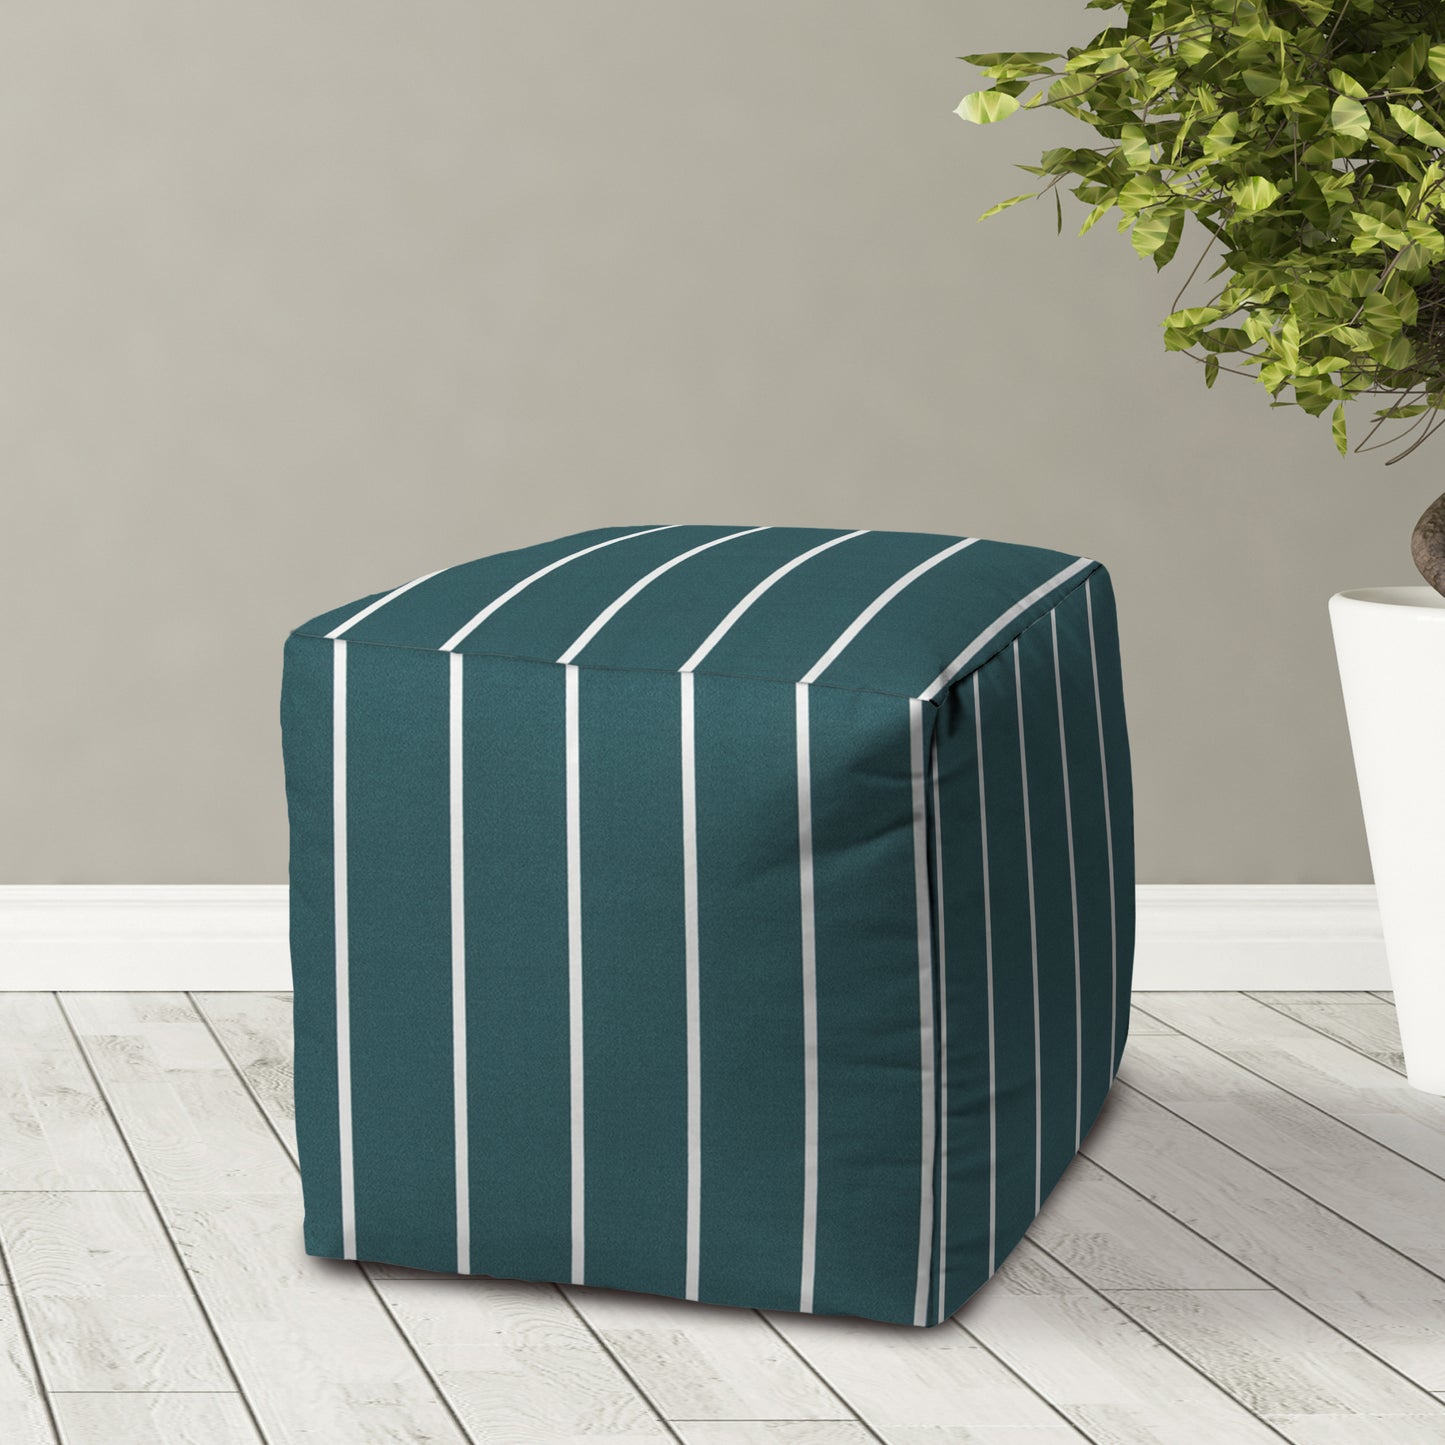 Slate Teal Outdoor Pouf - Zipper Cover with Bead Insert - 17x17x17 Cube